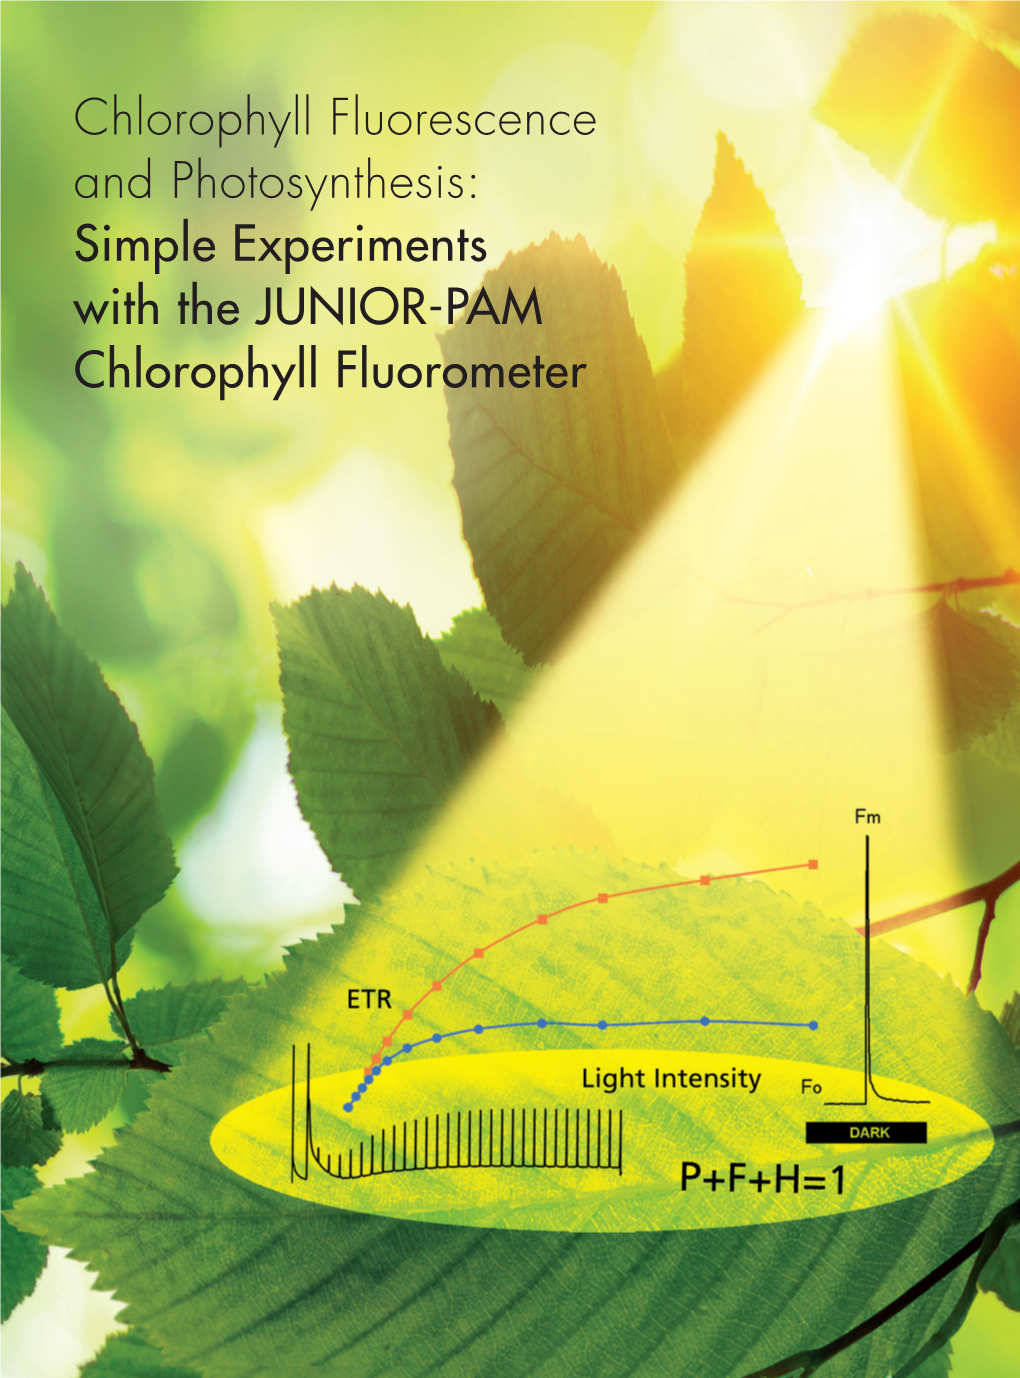 Simple Experiments with the JUNIOR-PAM Chlorophyll Fluorometer